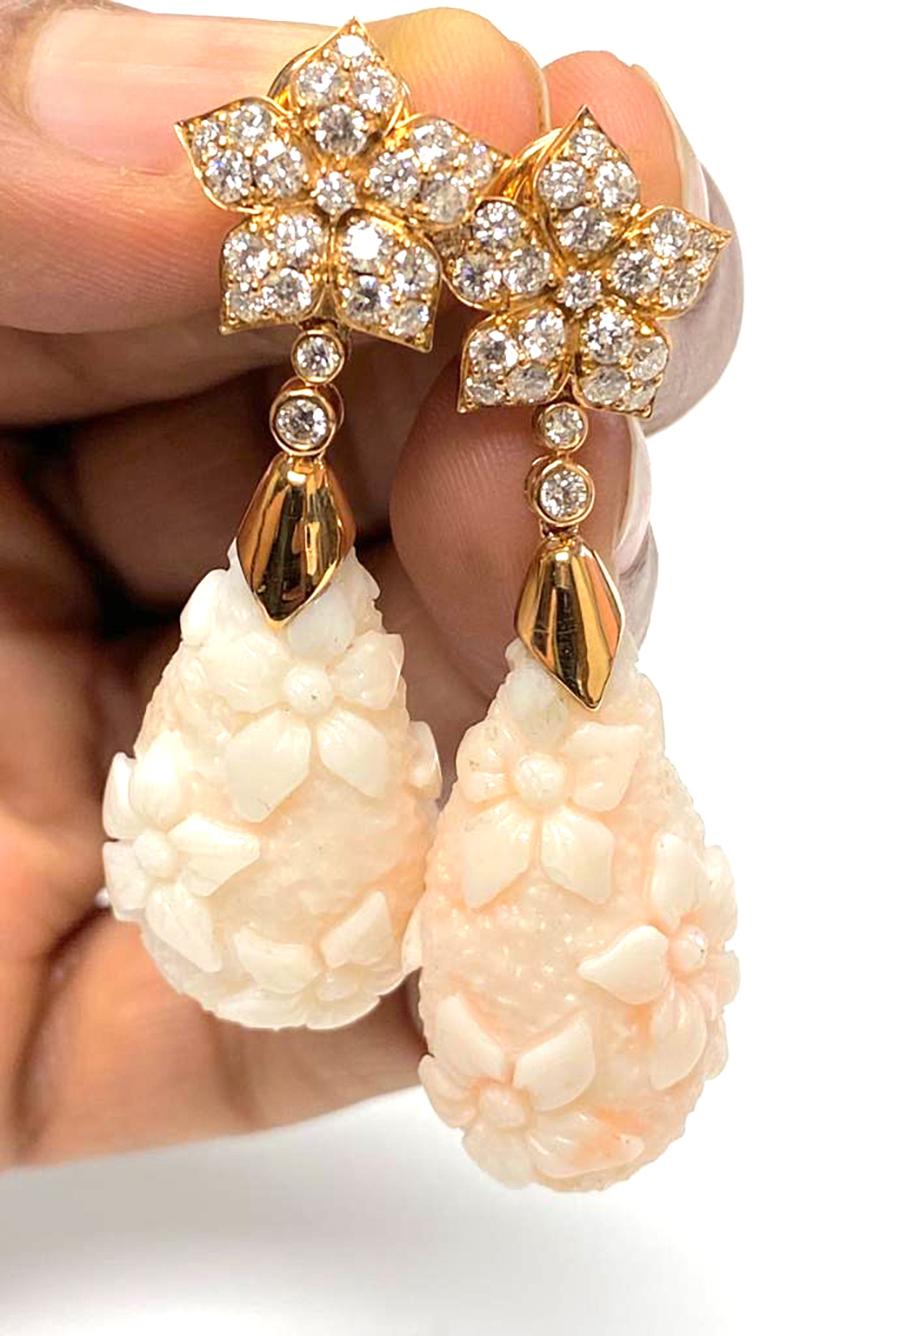 Carved White Coral Drop Earrings with Diamonds in 18k Rose Gold, from 'G-One' Collection

Gemstone Weight: 74.84 Carats

Diamond: G-H / VS, Approx Wt: 1.64 Carats
